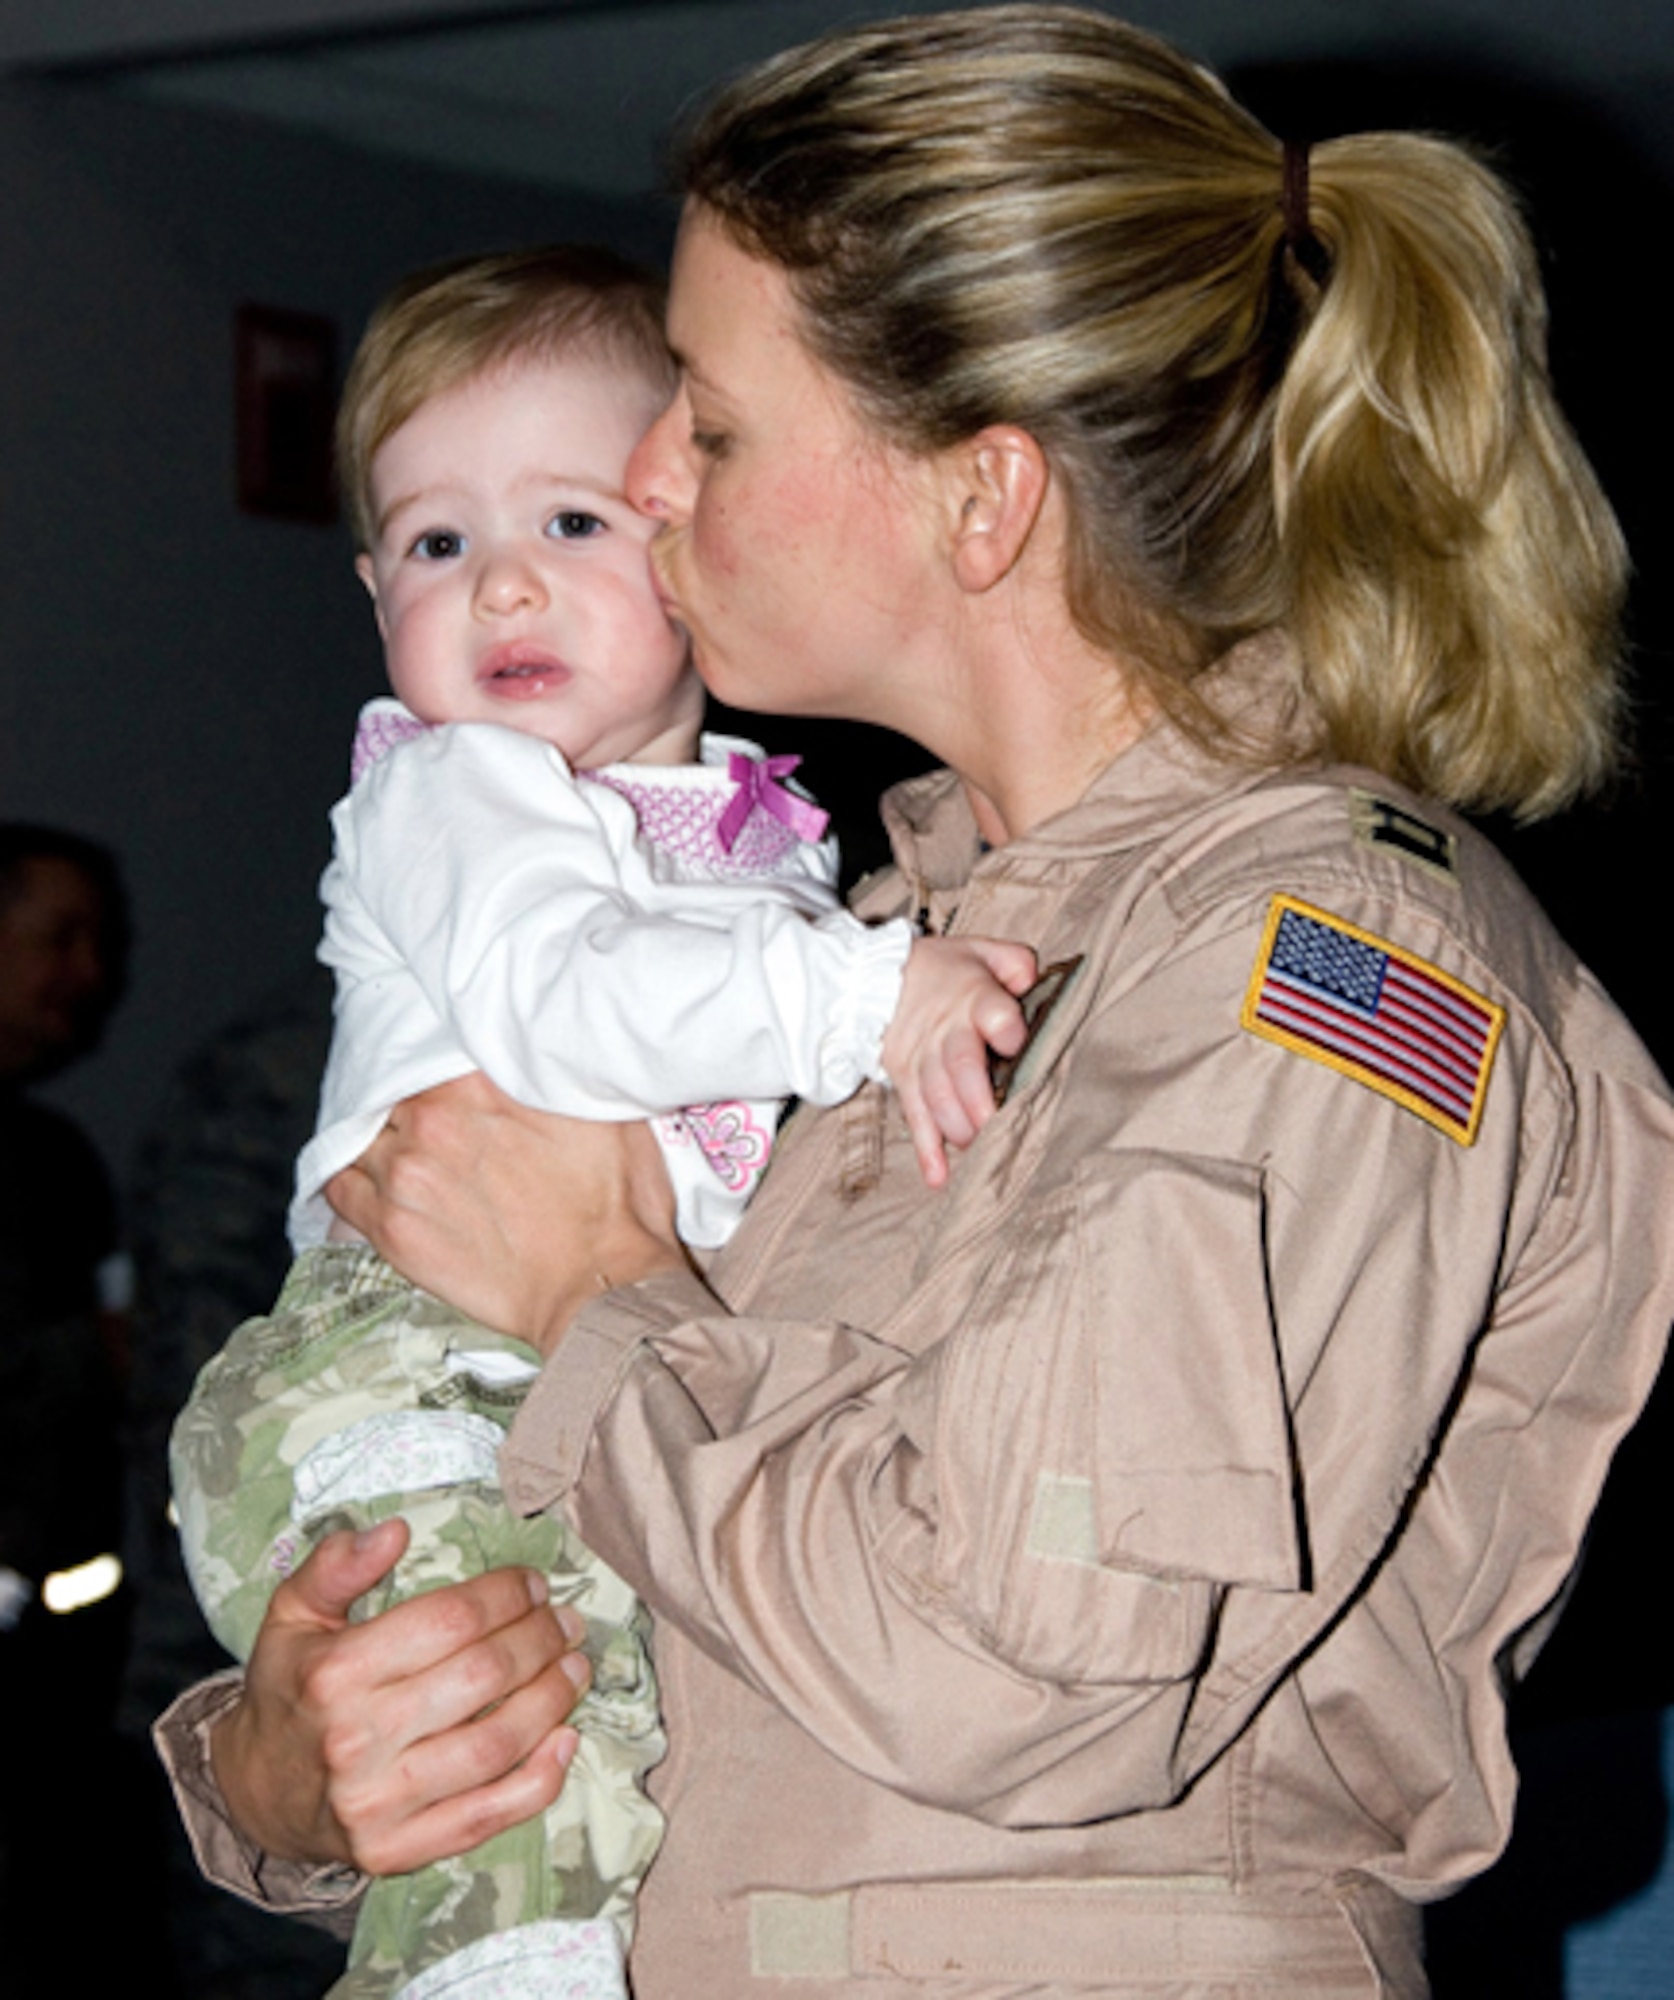 Capt. Becki Restrepo kisses her nine month old baby, Leona Grace, goodbye just before her departure. (U.S. Air Force photo by MSgt Shannon Bond) (RELEASED)